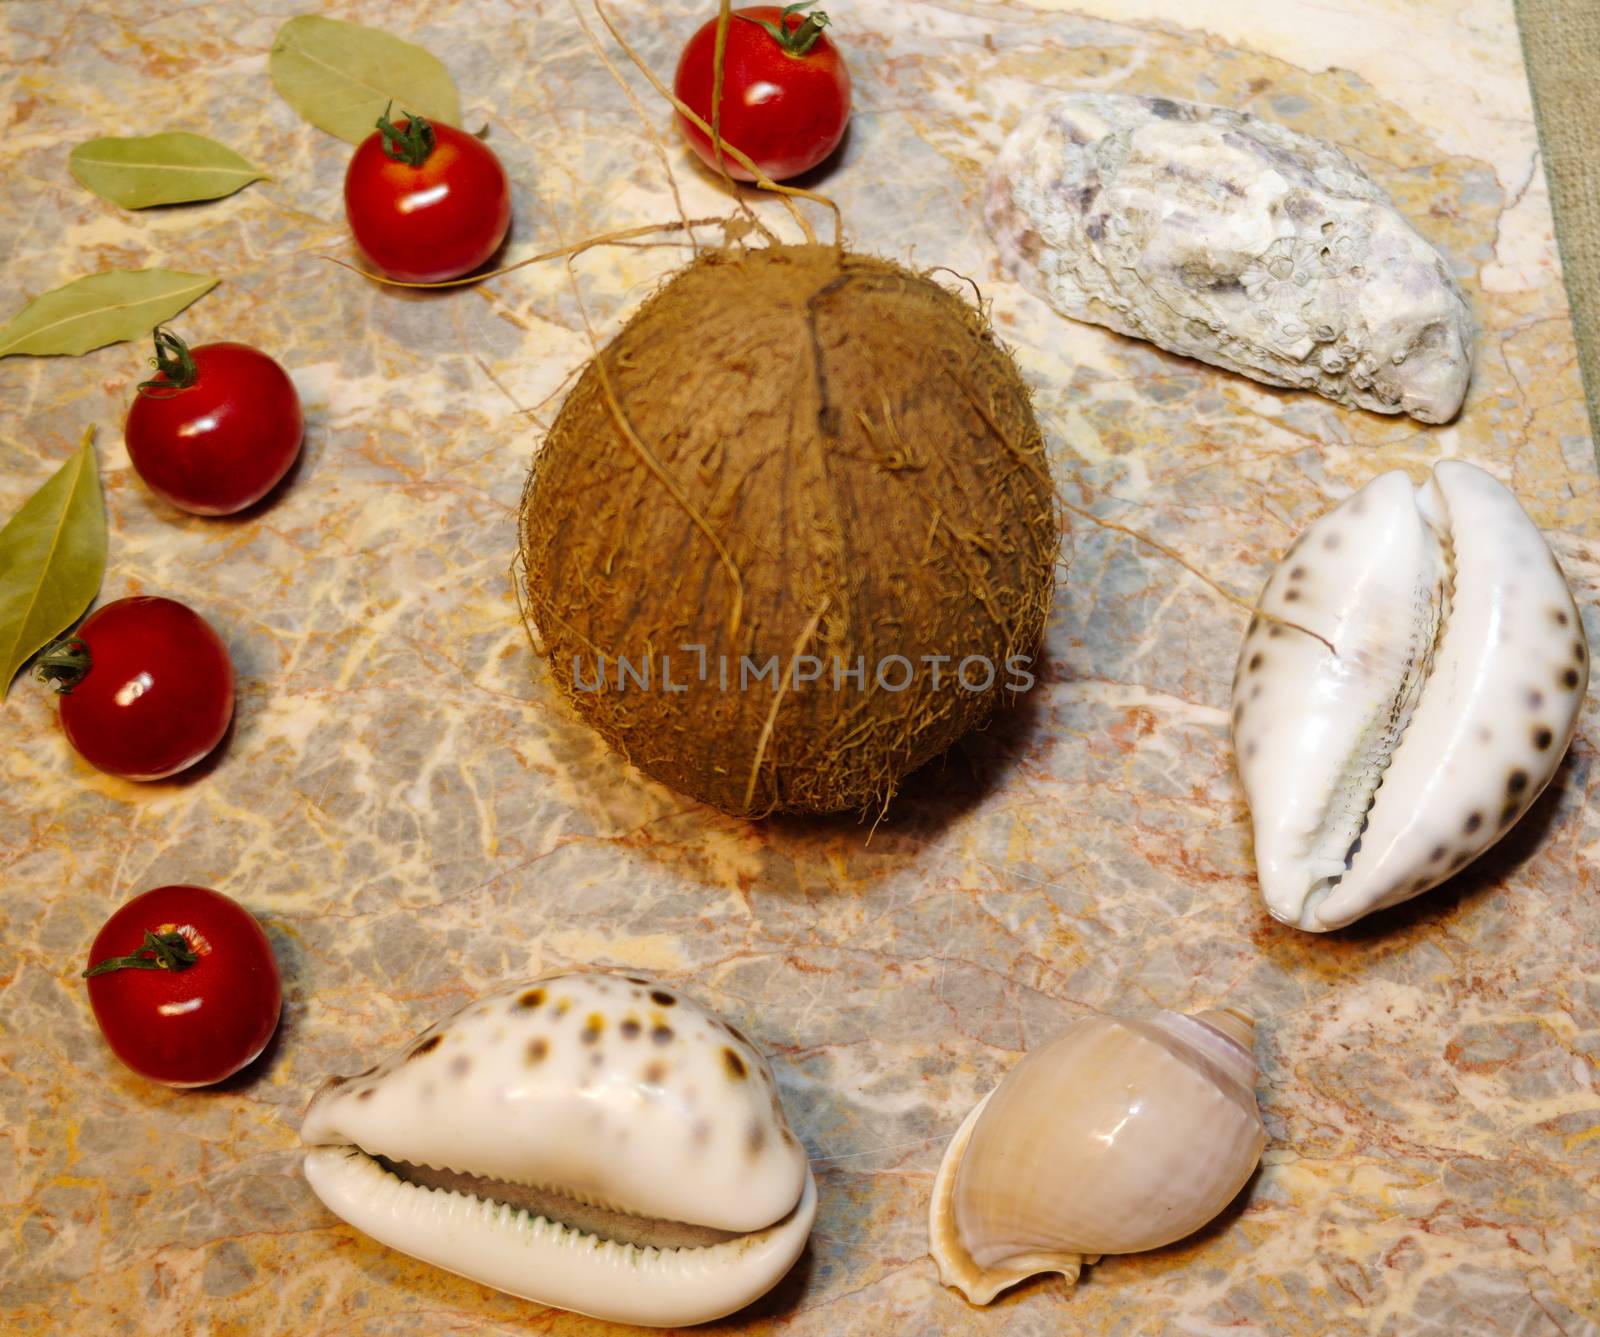 vegetables, seashells and coconut on a marble surface: cherry tomatoes, bell peppers, bay leaves, oyster, shells and coconut